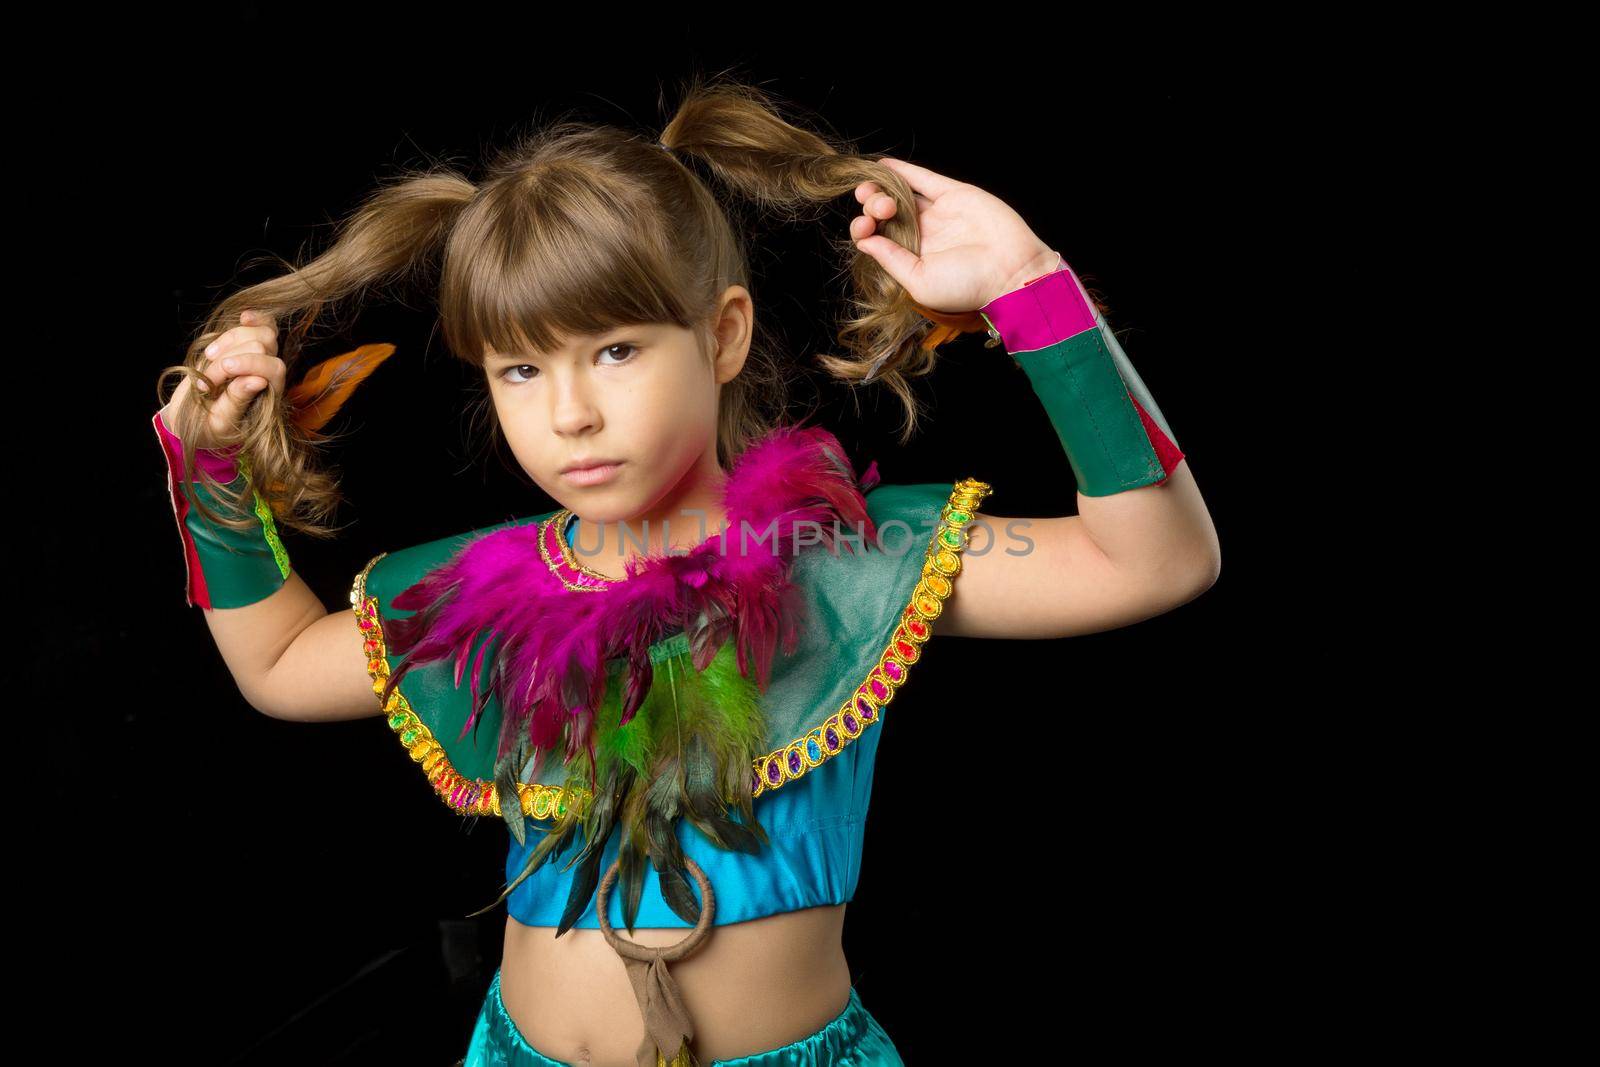 Portrait of girl with angry face expression. Beautiful preteen girl dressed colorful ethnic costume standing against black background. Child with serious face expression posing in studio